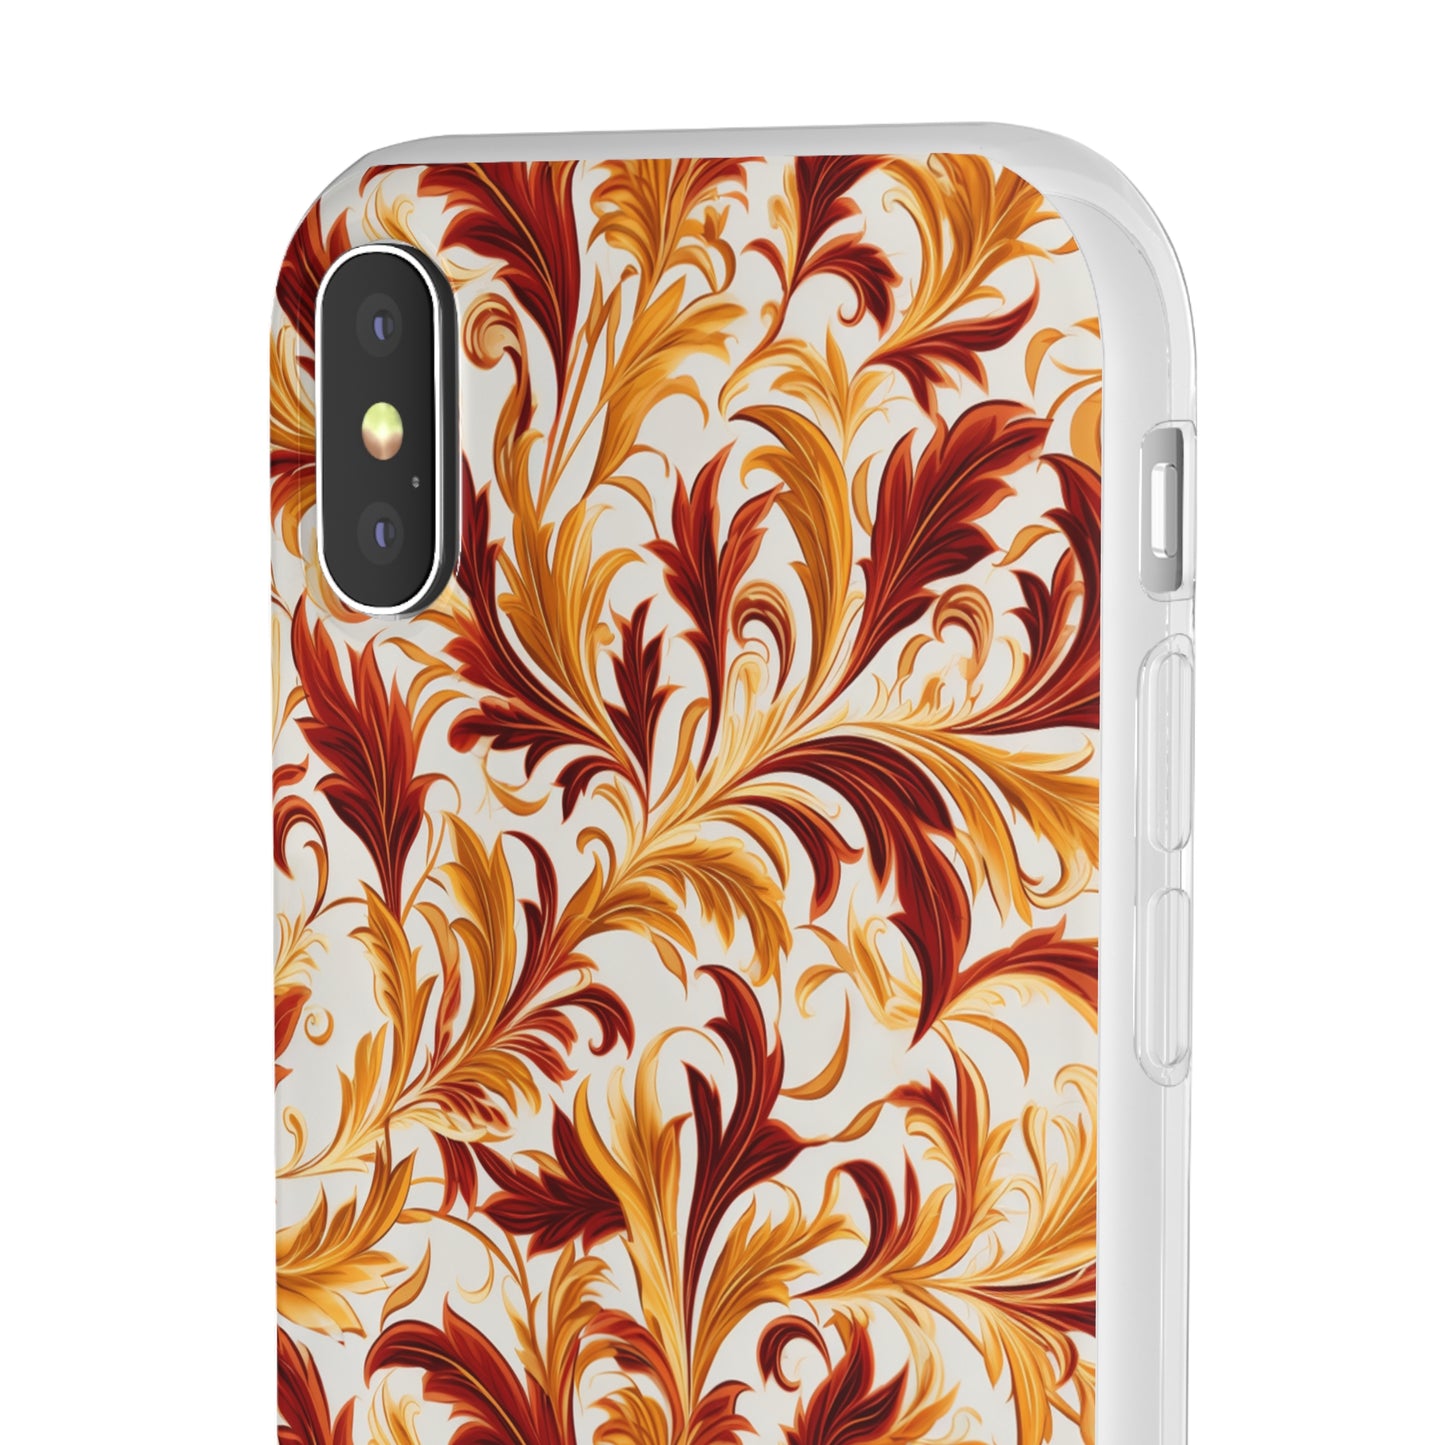 Swirling Autumn: Vortexes of Fall Foliage in Gold and Bronze - Flexible Phone Case